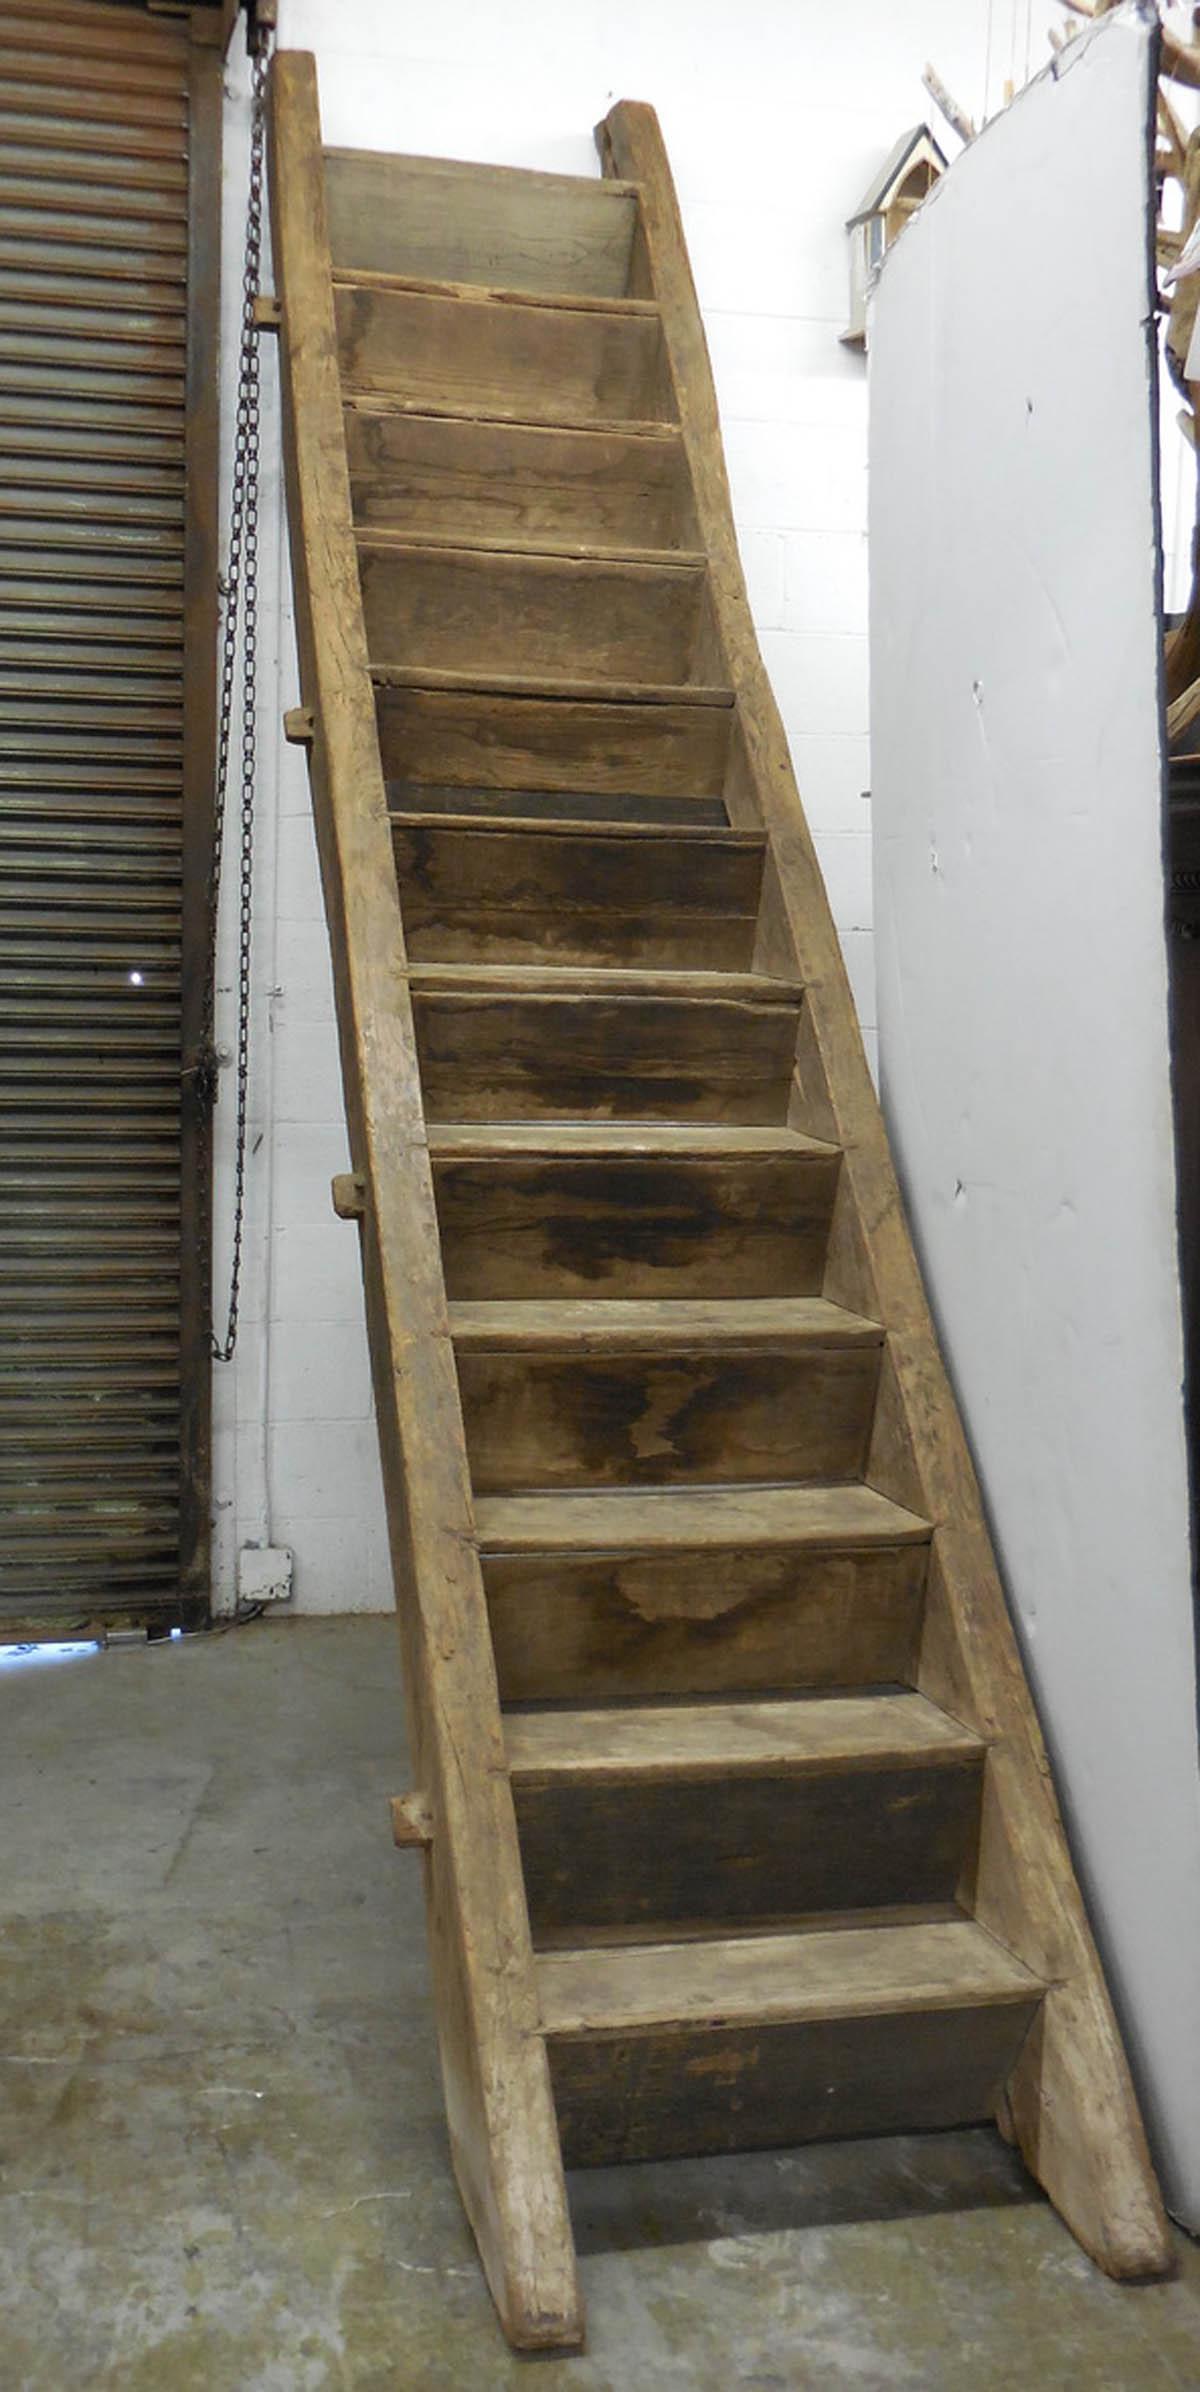 Old elmwood stairs made in mortise and tenon construction. Very sturdy. When standing up as it would if installed, it measures 119 inches tall. Each step/tread measures 9 inches deep and the rise is 9.5 inches tall. The width of the stair is